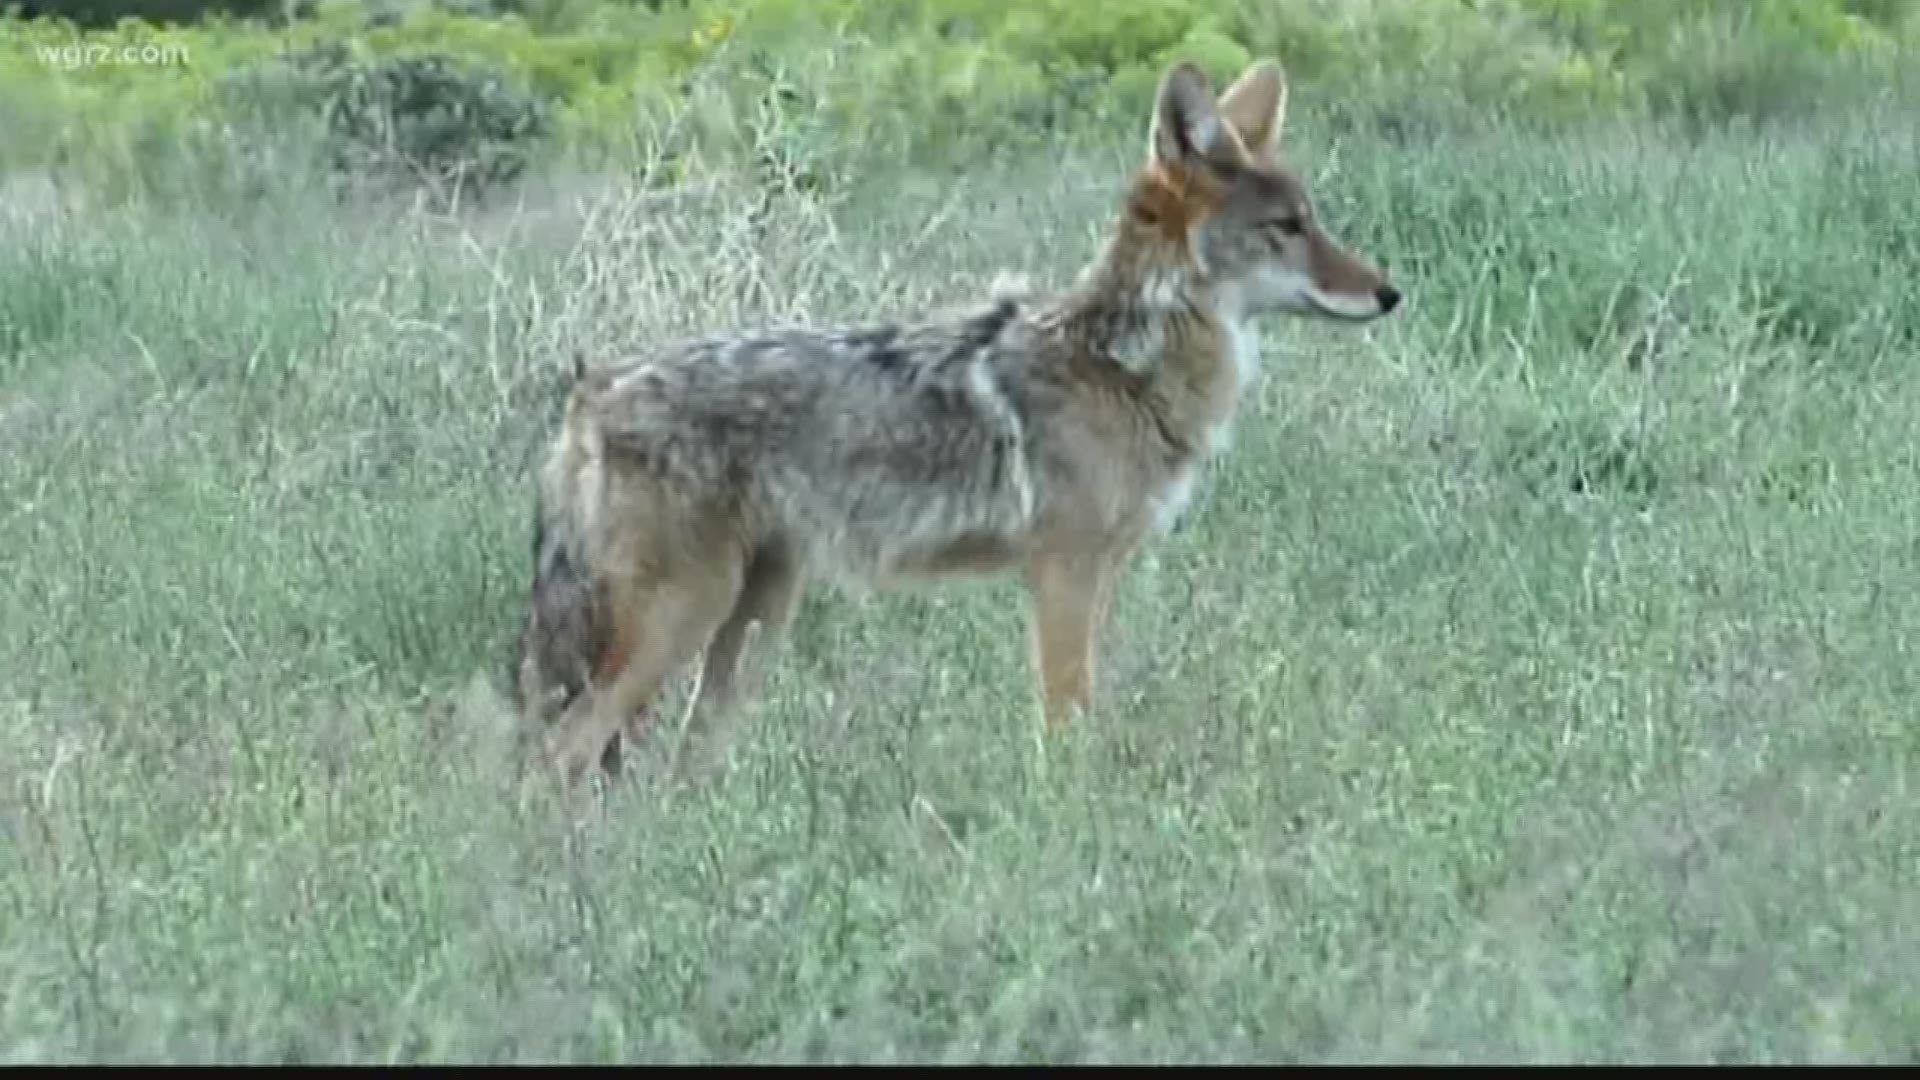 In this week's "2 the Outdoors," Terry Belke teaches us about Coyotes - and the misconceptions surrounding them.